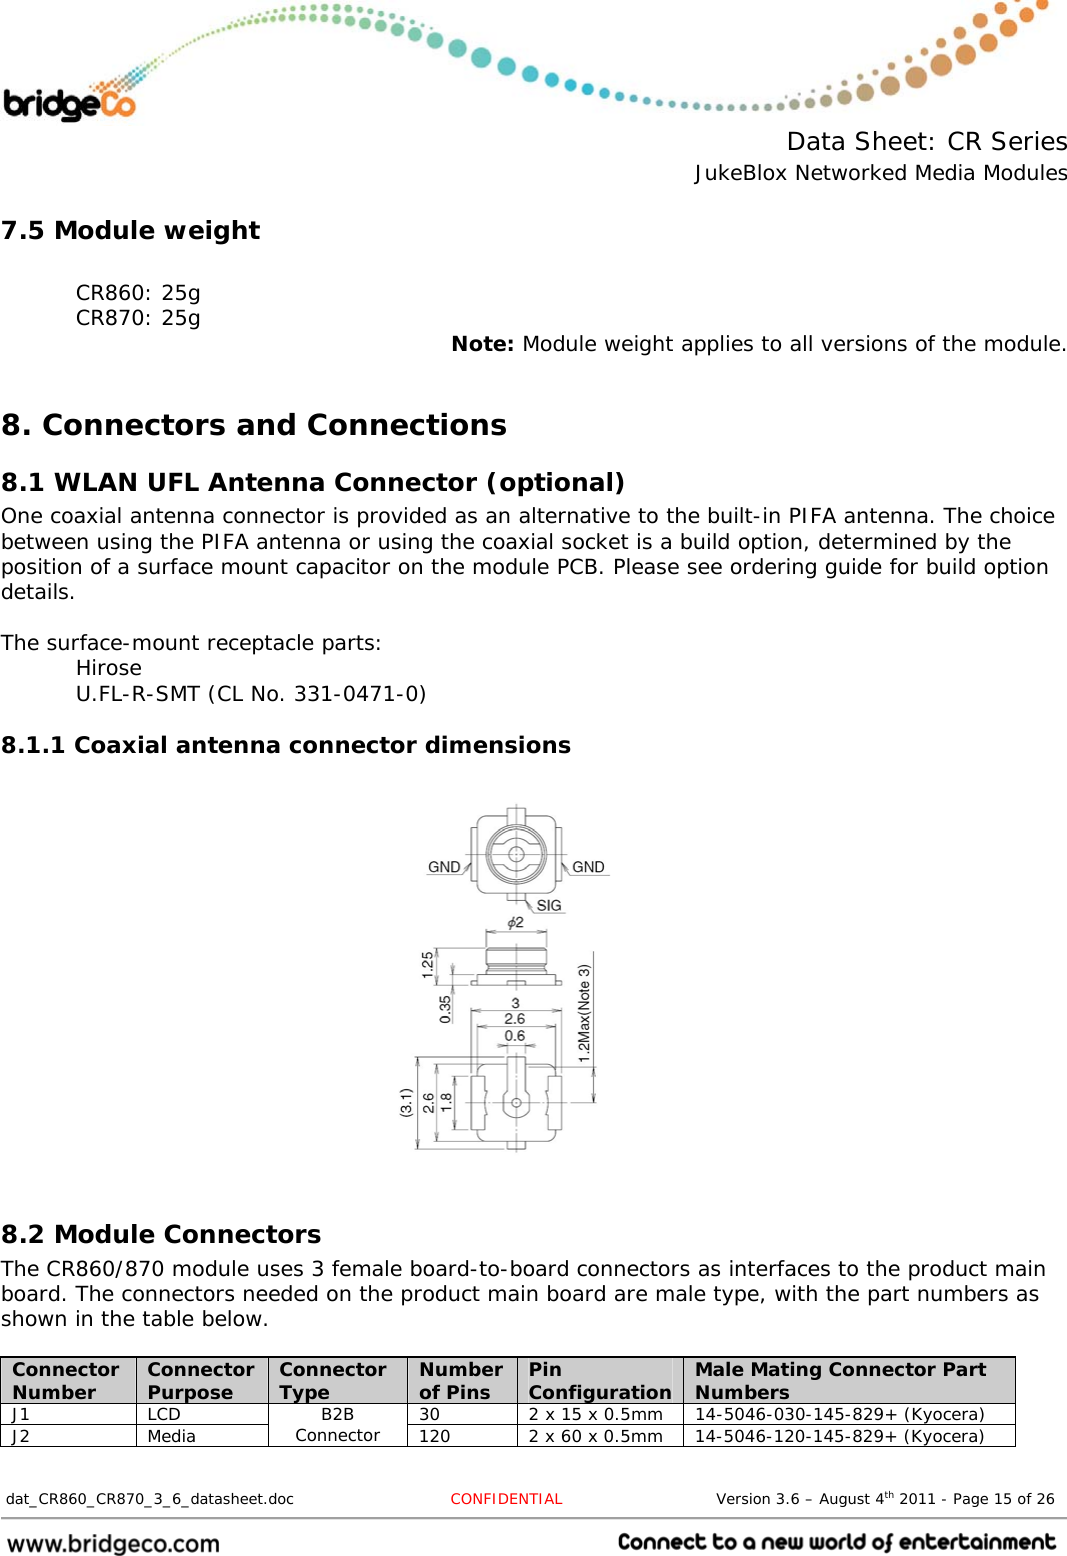  Data Sheet: CR Series JukeBlox Networked Media Modules  dat_CR860_CR870_3_6_datasheet.doc  CONFIDENTIAL                              Version 3.6 – August 4th 2011 - Page 15 of 26                                 7.5 Module weight  CR860: 25g CR870: 25g  Note: Module weight applies to all versions of the module.  8. Connectors and Connections 8.1 WLAN UFL Antenna Connector (optional) One coaxial antenna connector is provided as an alternative to the built-in PIFA antenna. The choice between using the PIFA antenna or using the coaxial socket is a build option, determined by the position of a surface mount capacitor on the module PCB. Please see ordering guide for build option details.  The surface-mount receptacle parts:  Hirose   U.FL-R-SMT (CL No. 331-0471-0) 8.1.1 Coaxial antenna connector dimensions               8.2 Module Connectors The CR860/870 module uses 3 female board-to-board connectors as interfaces to the product main board. The connectors needed on the product main board are male type, with the part numbers as shown in the table below.  Connector Number  Connector Purpose  Connector Type  Number of Pins  Pin Configuration Male Mating Connector Part Numbers J1  LCD  30  2 x 15 x 0.5mm  14-5046-030-145-829+ (Kyocera) J2 Media  B2B Connector  120  2 x 60 x 0.5mm  14-5046-120-145-829+ (Kyocera)  